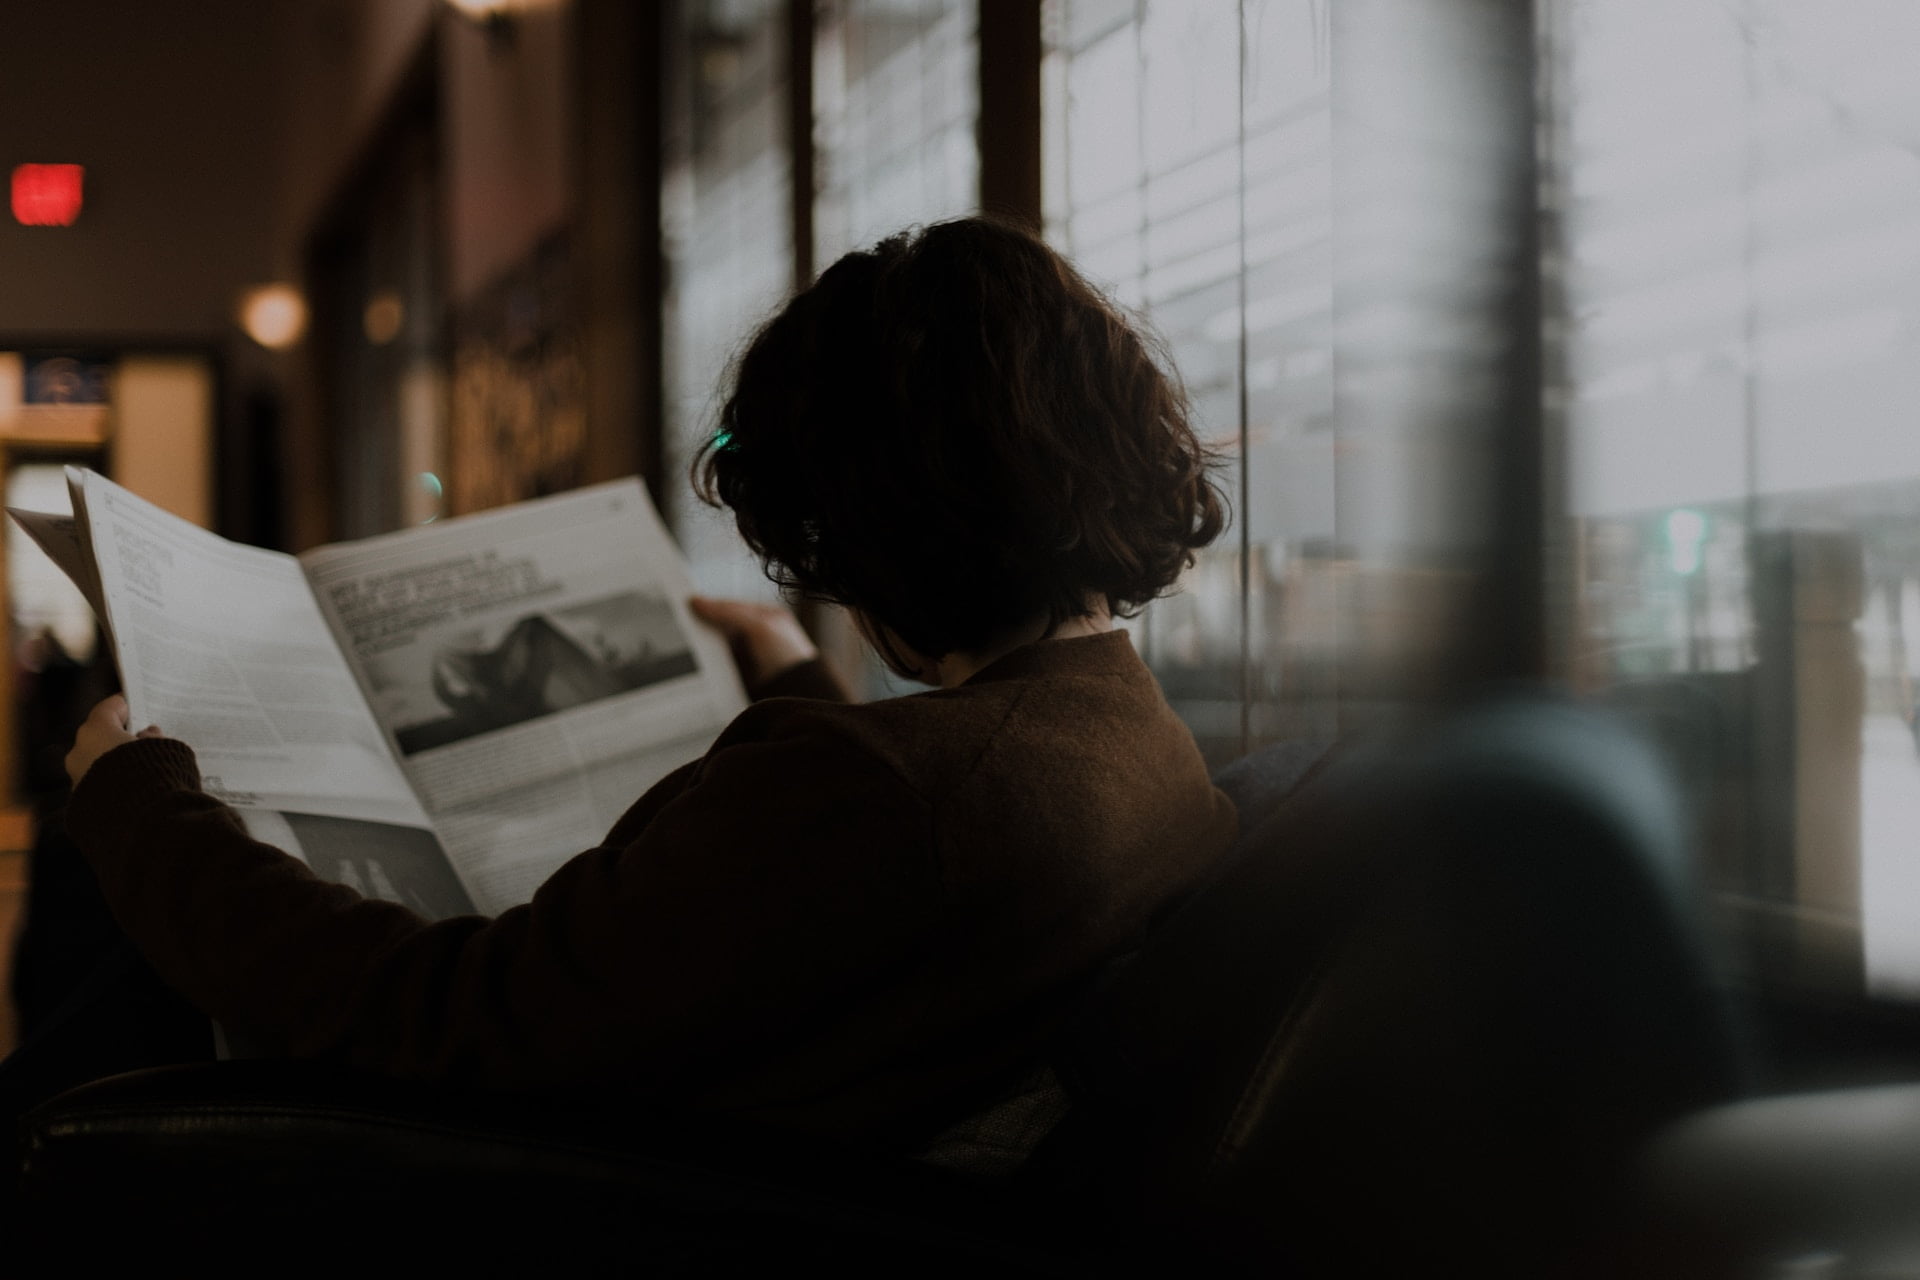 Depicts a woman reading a newspaper. Used as a cover image for an article rounding up news stories about alternative asset investing.